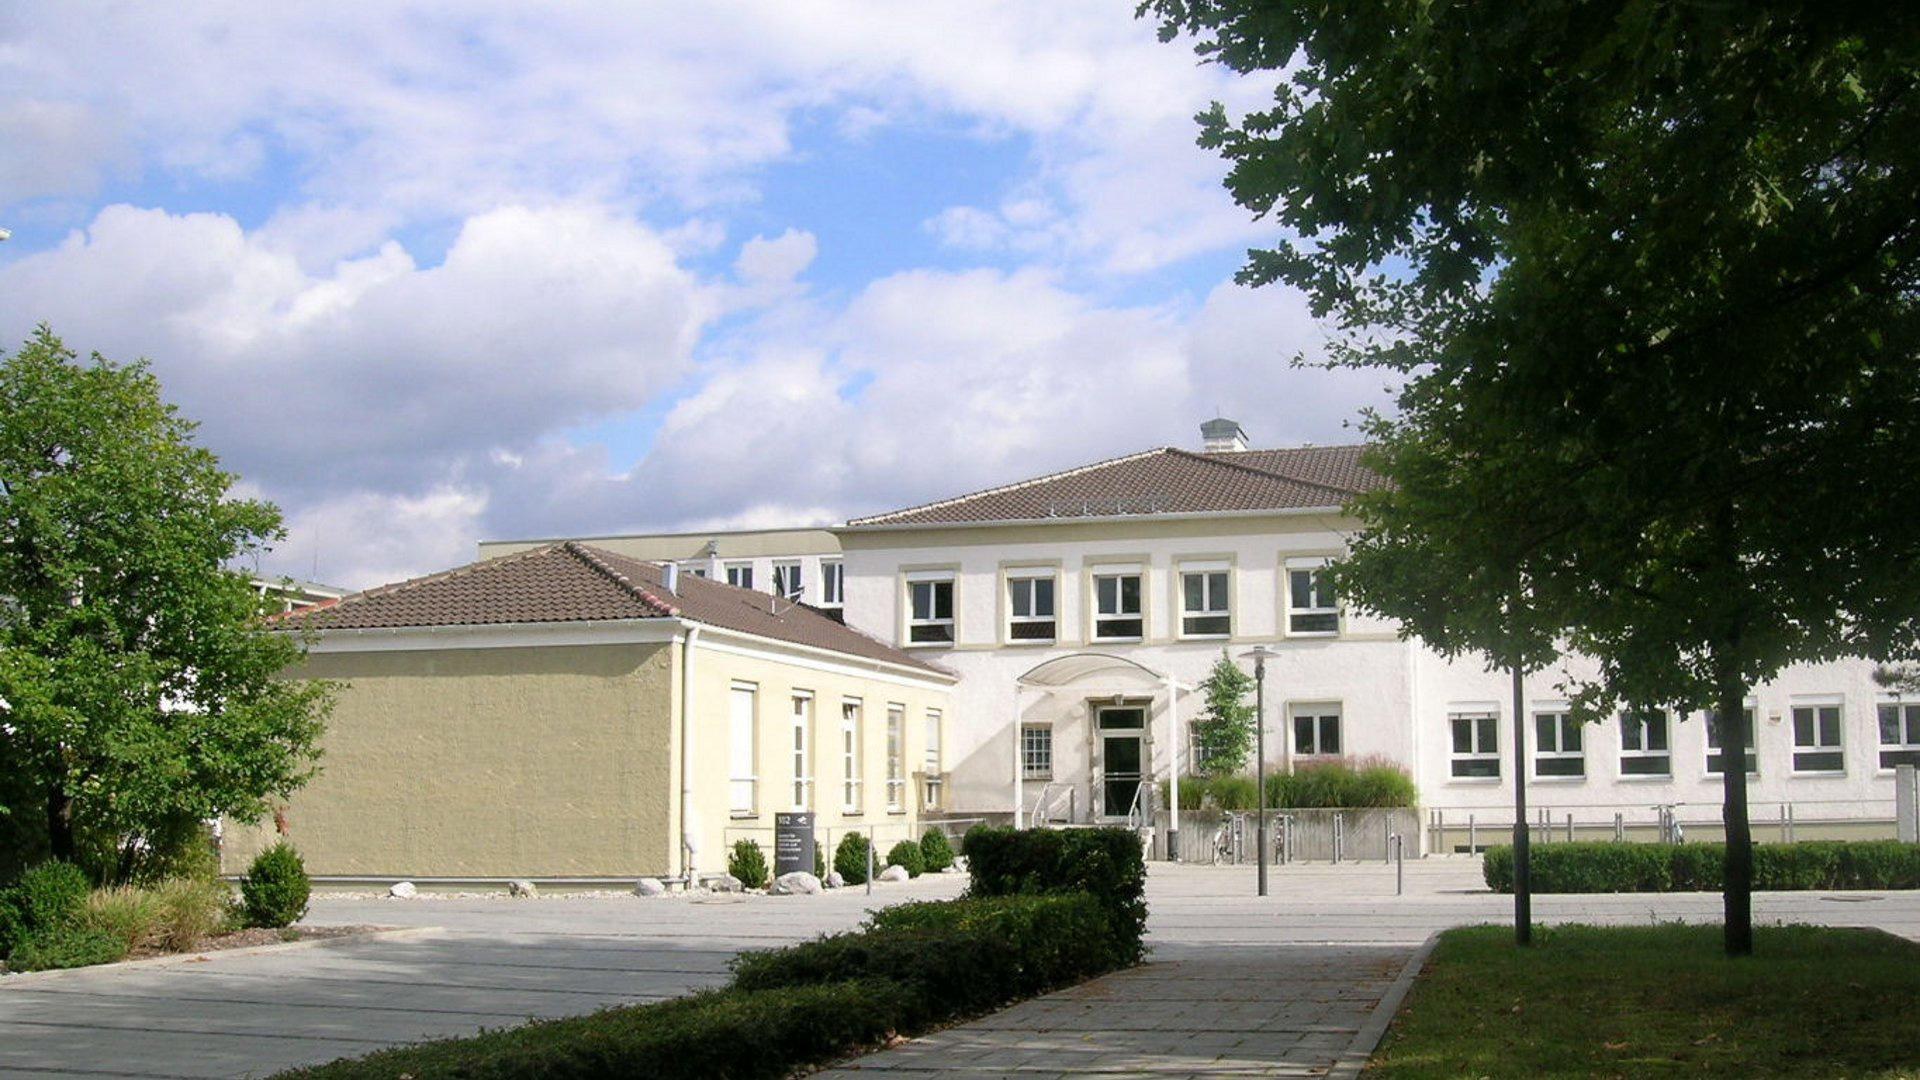 The main building of the Microwaves and Radar Institute at the DLR site at Oberpfaffenhofen